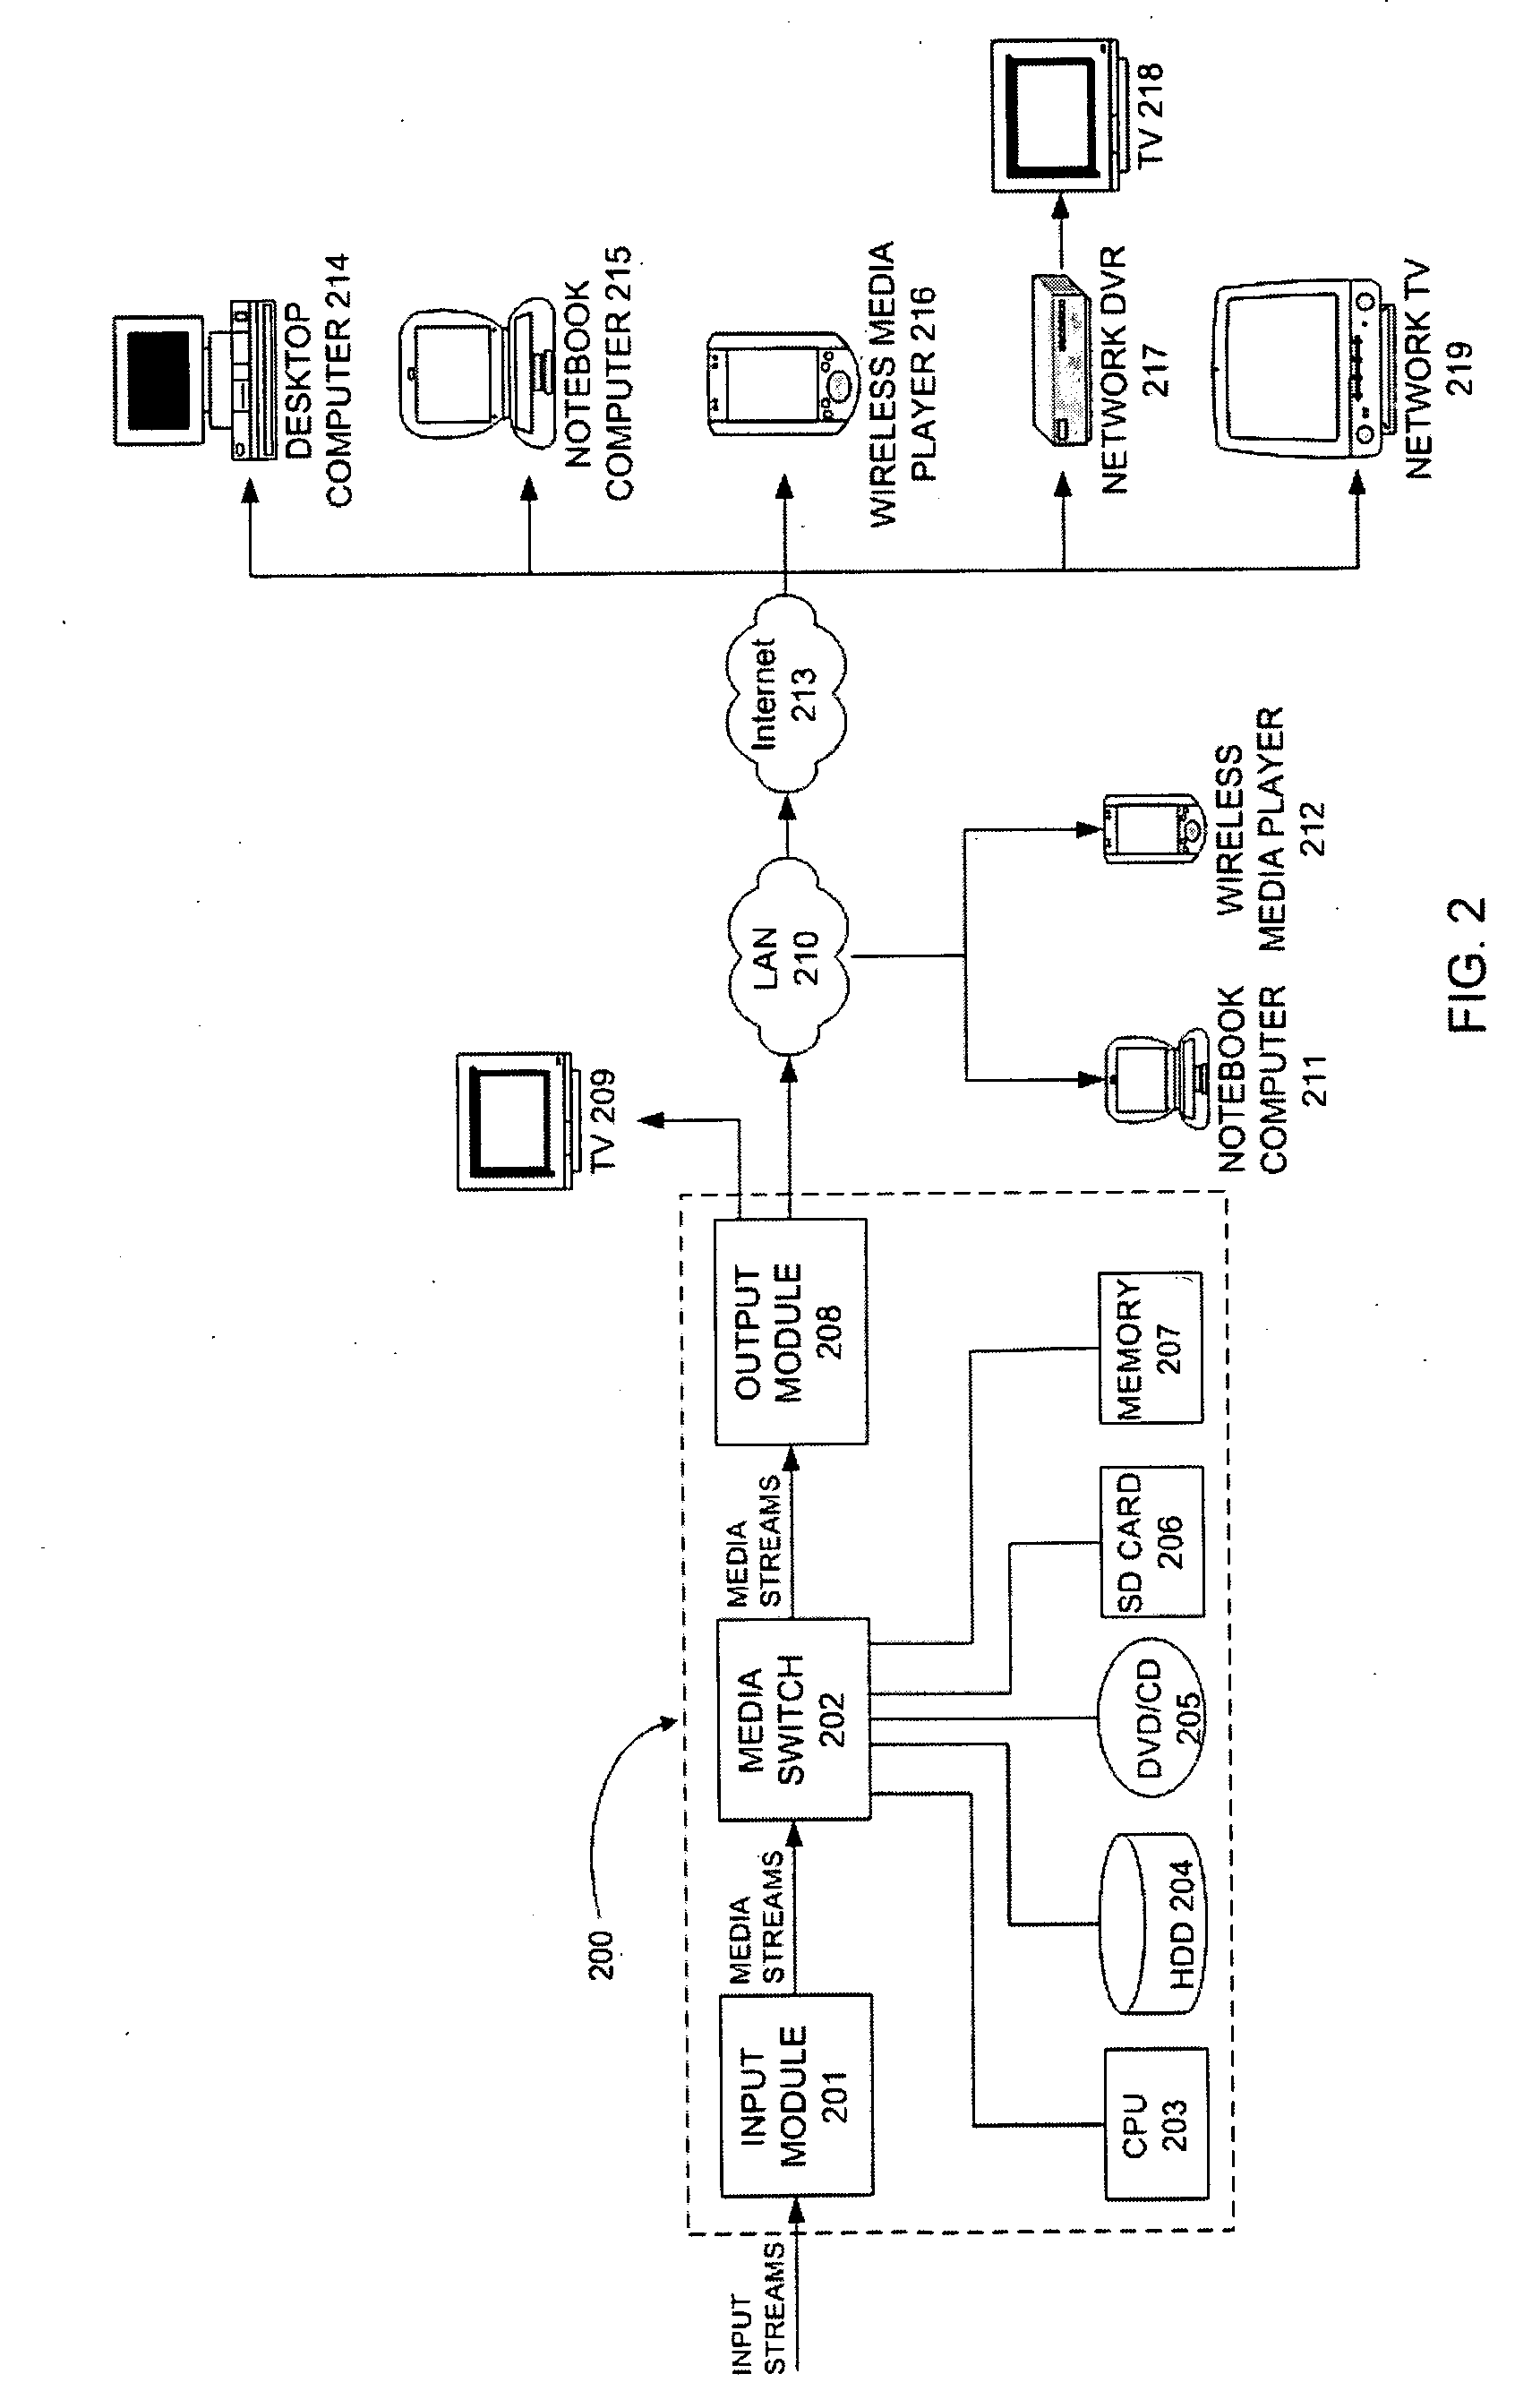 Method and system for accessing media content via the Internet